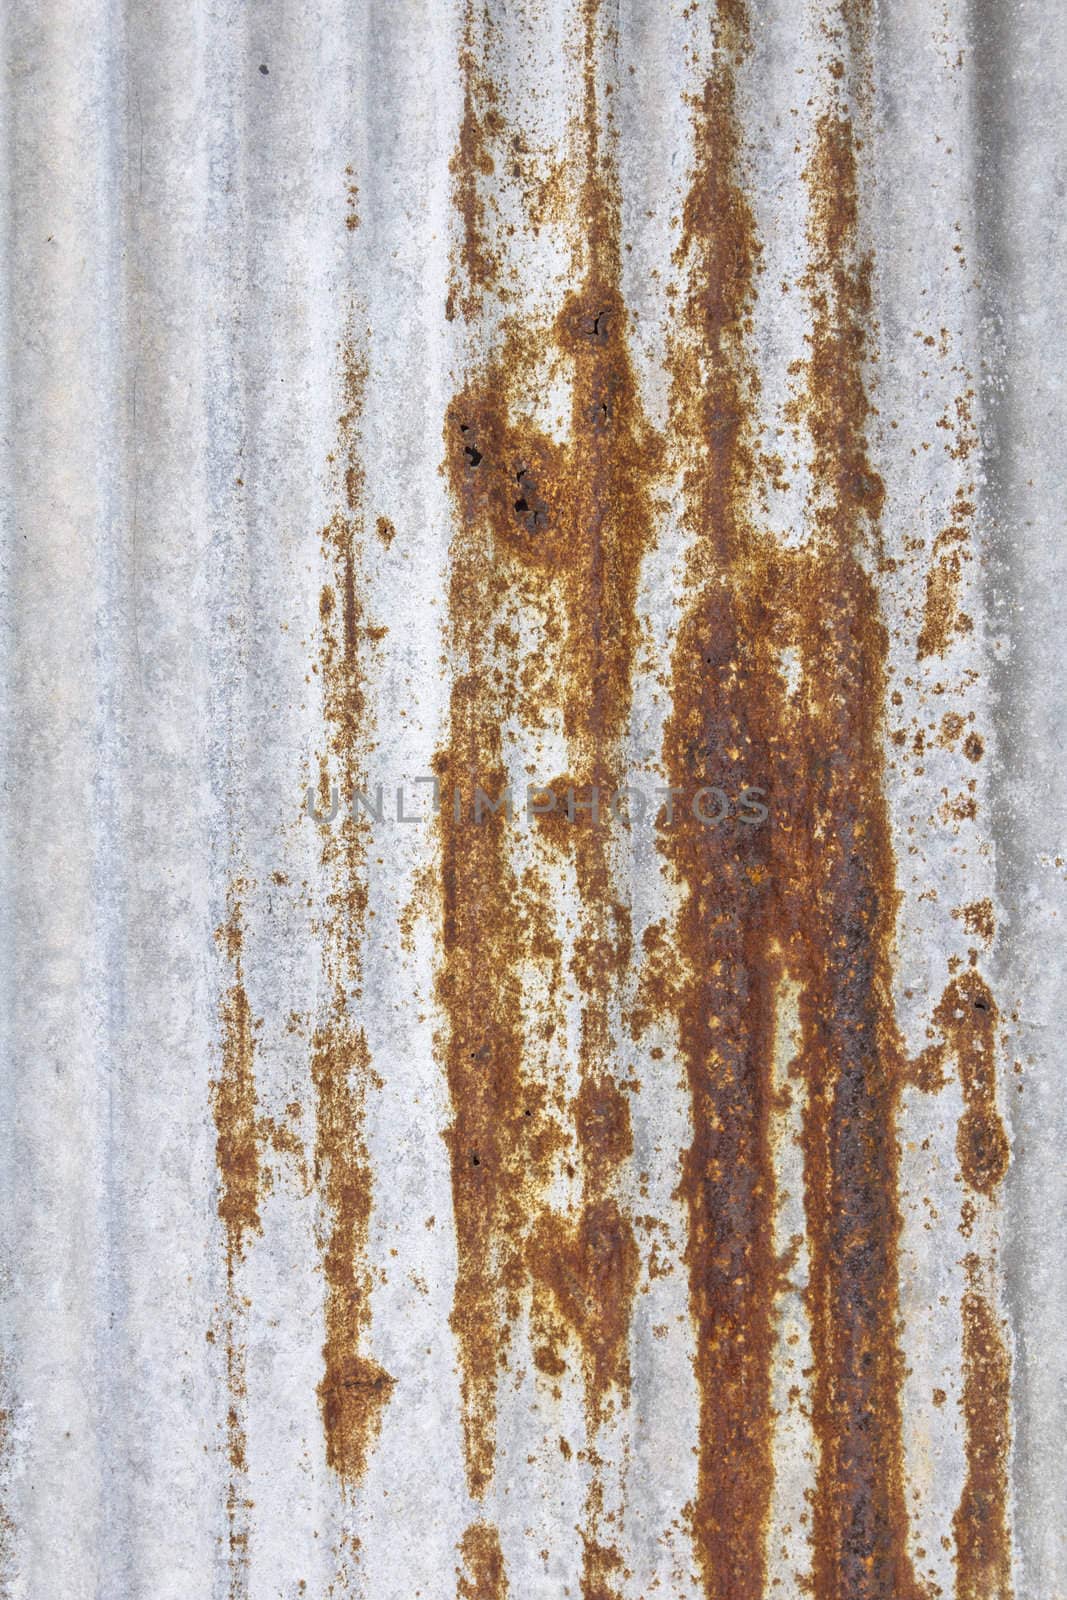 Backgrounds of galvanized iron from weathered